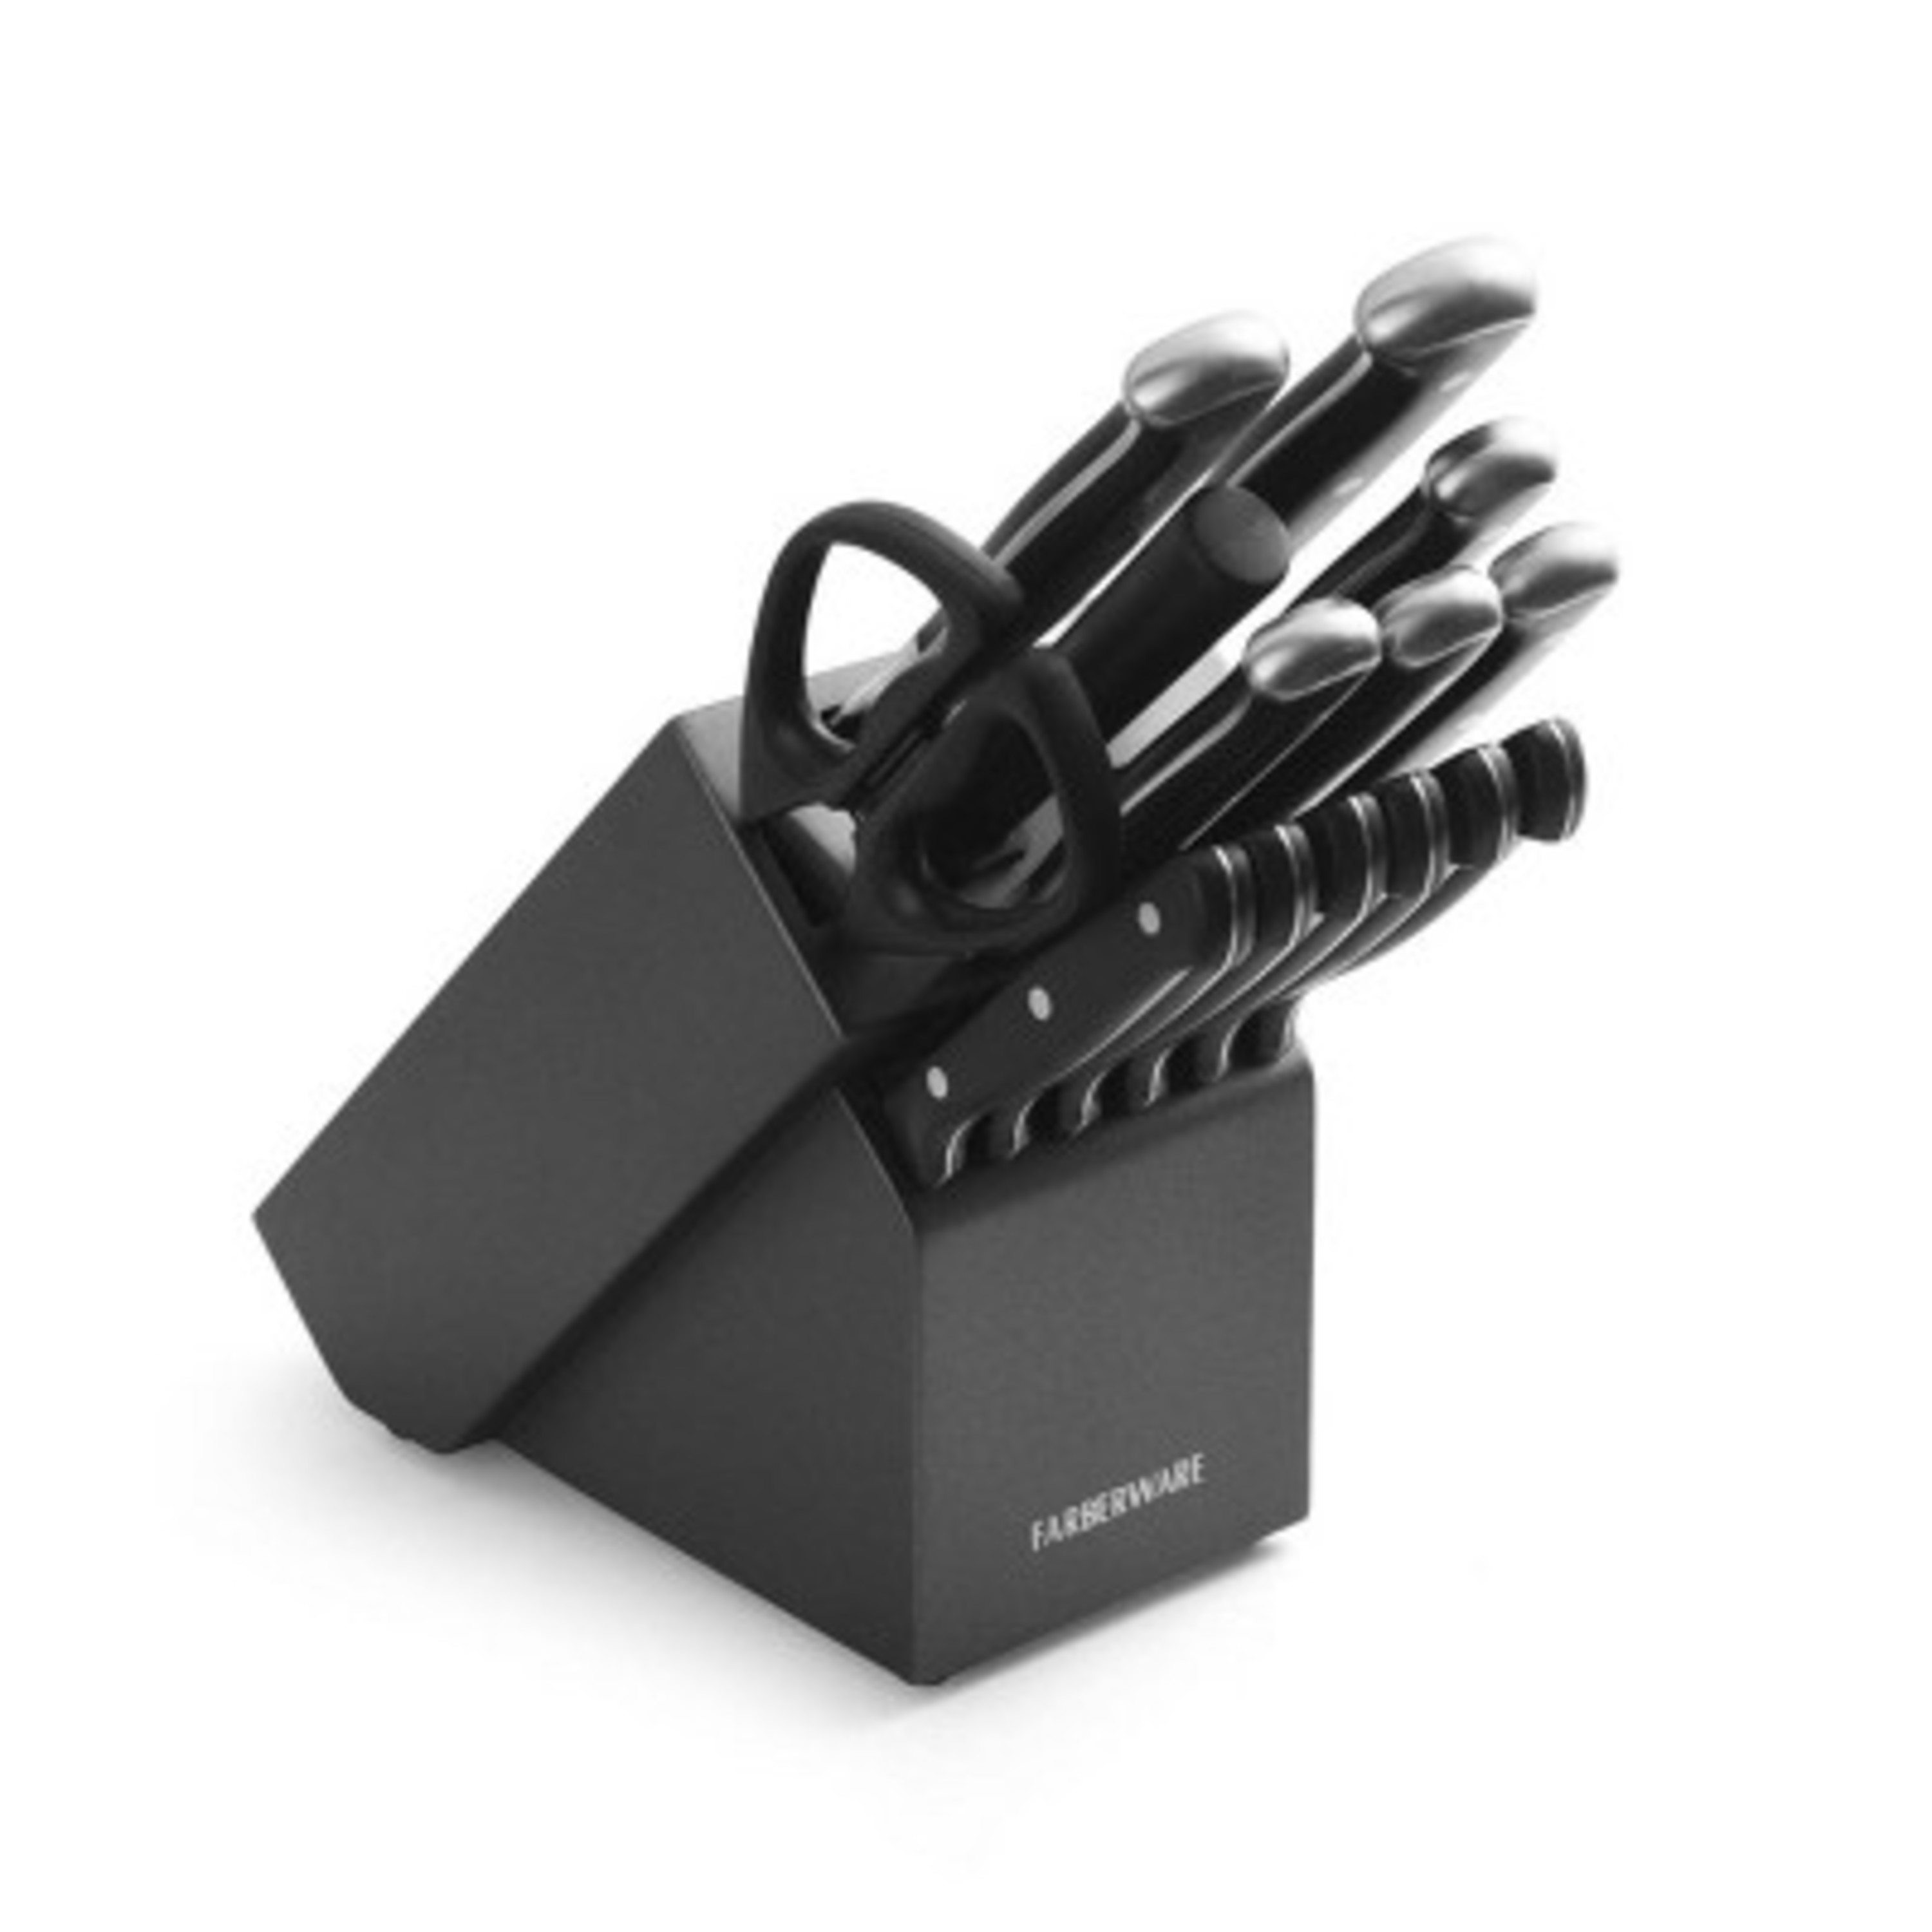 Farberware 15-piece Forged Triple-Rivet Kitchen Knife Block Set with Black Block and Black Handles - image 1 of 20